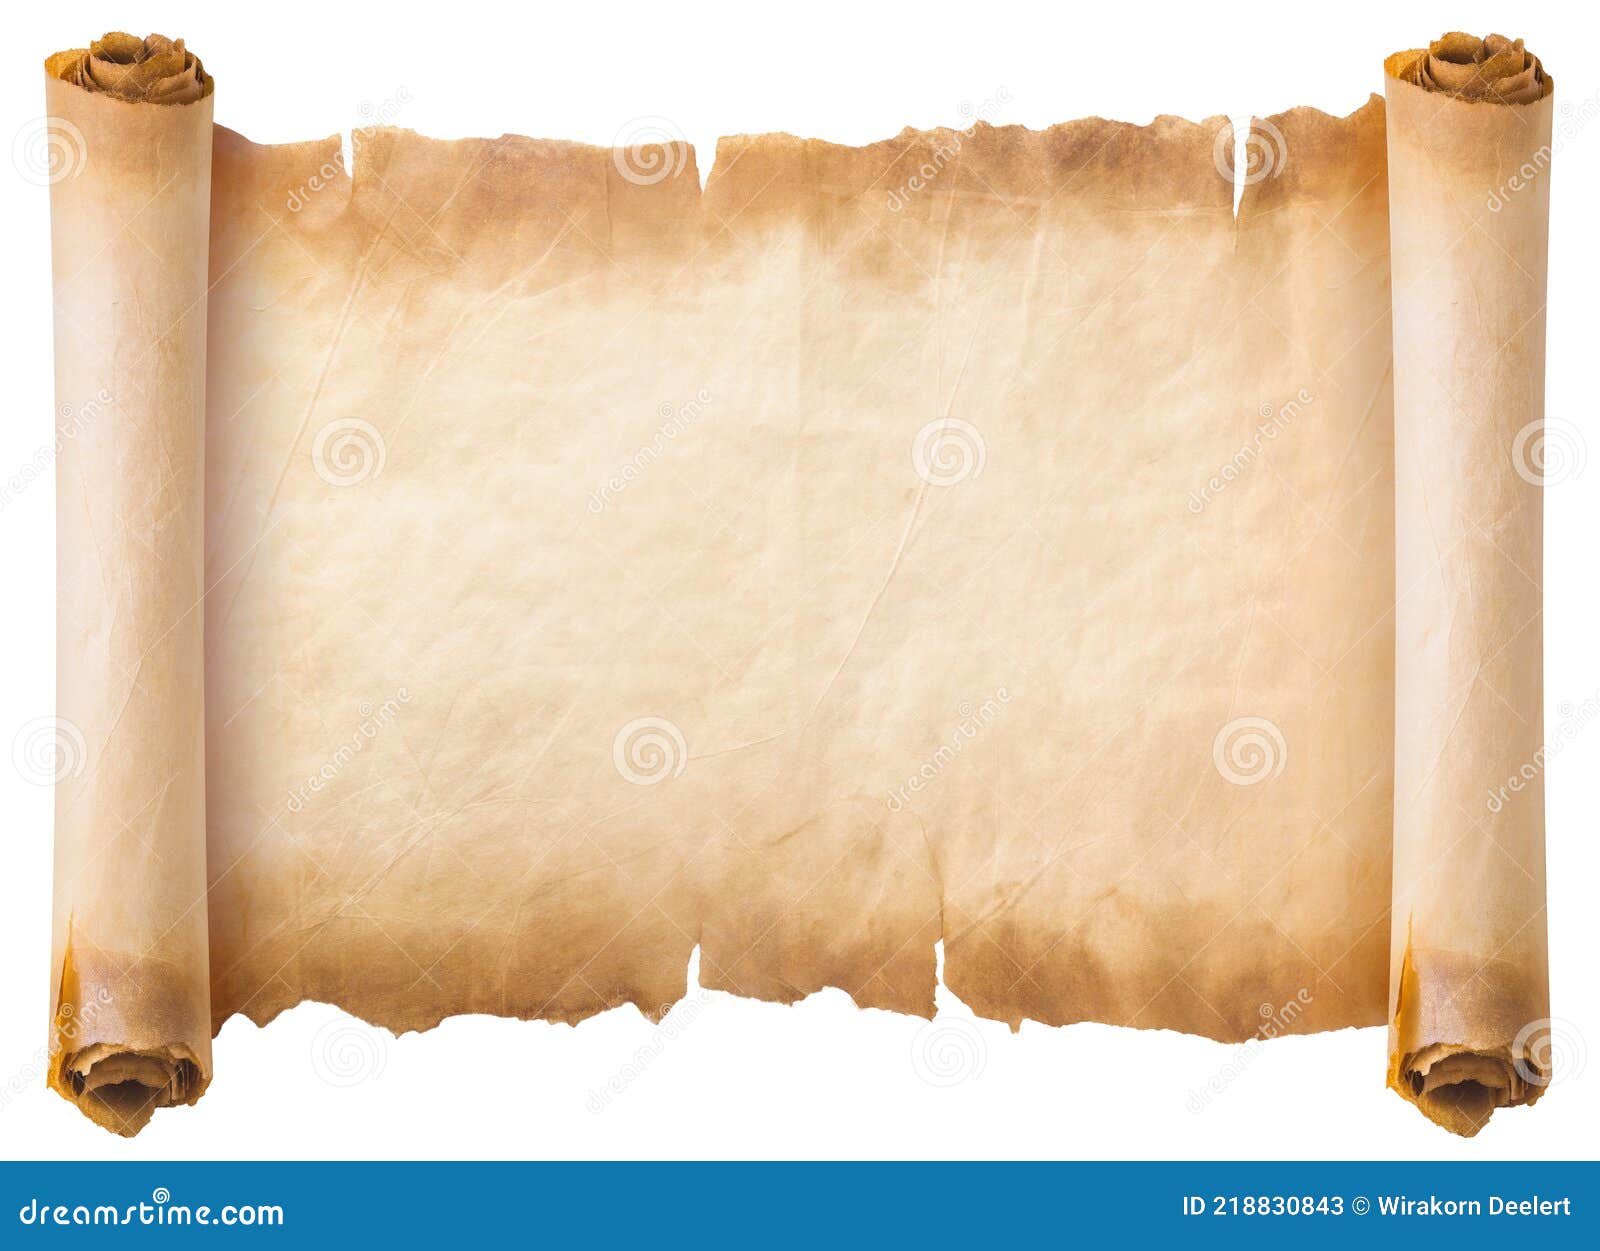 https://thumbs.dreamstime.com/z/old-parchment-paper-scroll-sheet-vintage-aged-texture-isolated-white-background-old-parchment-paper-scroll-sheet-vintage-218830843.jpg